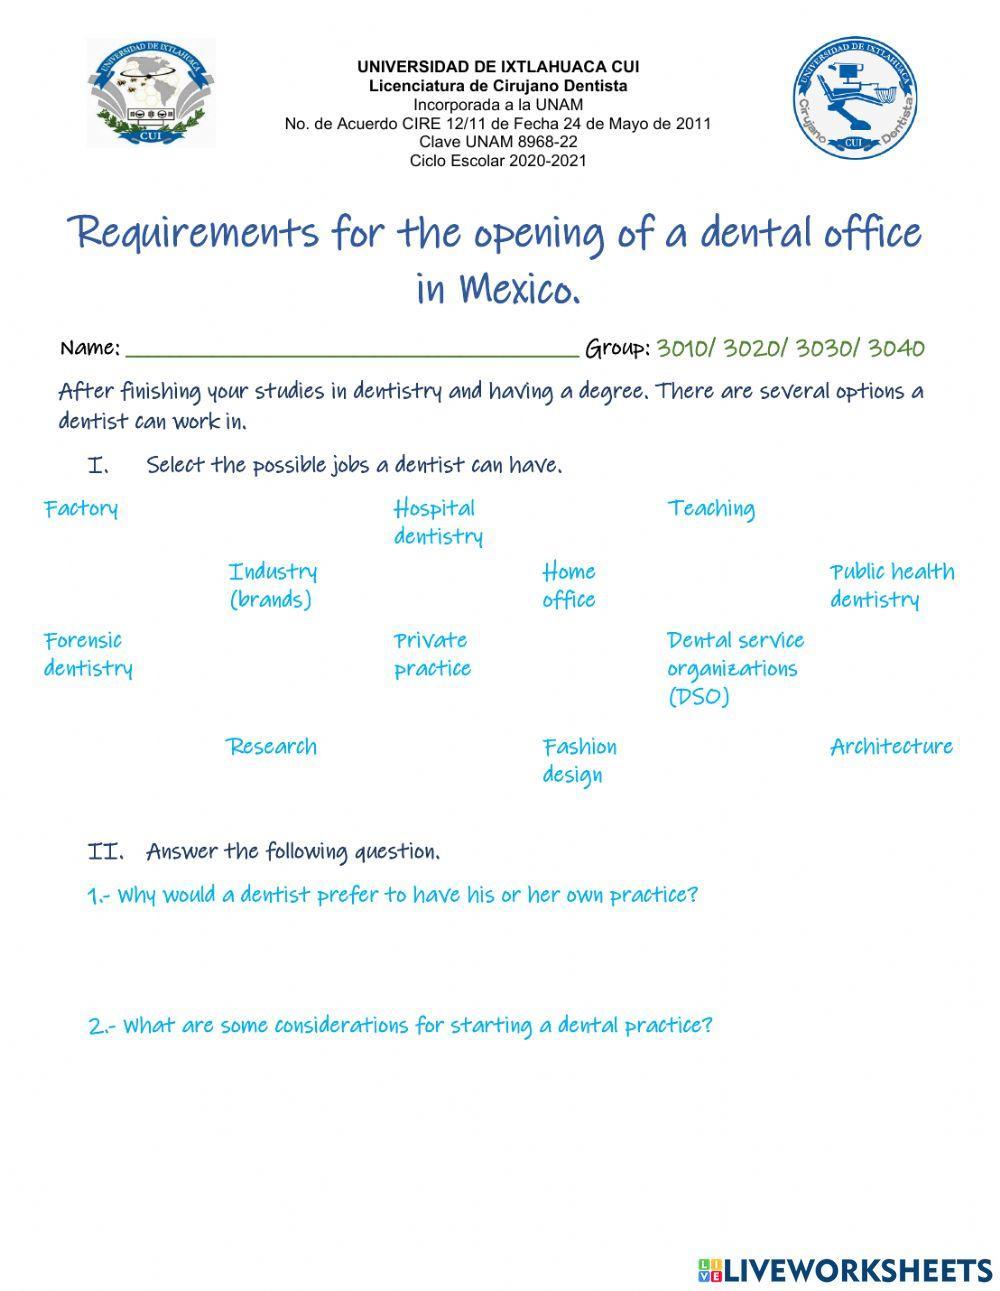 Requirements for a dental practice